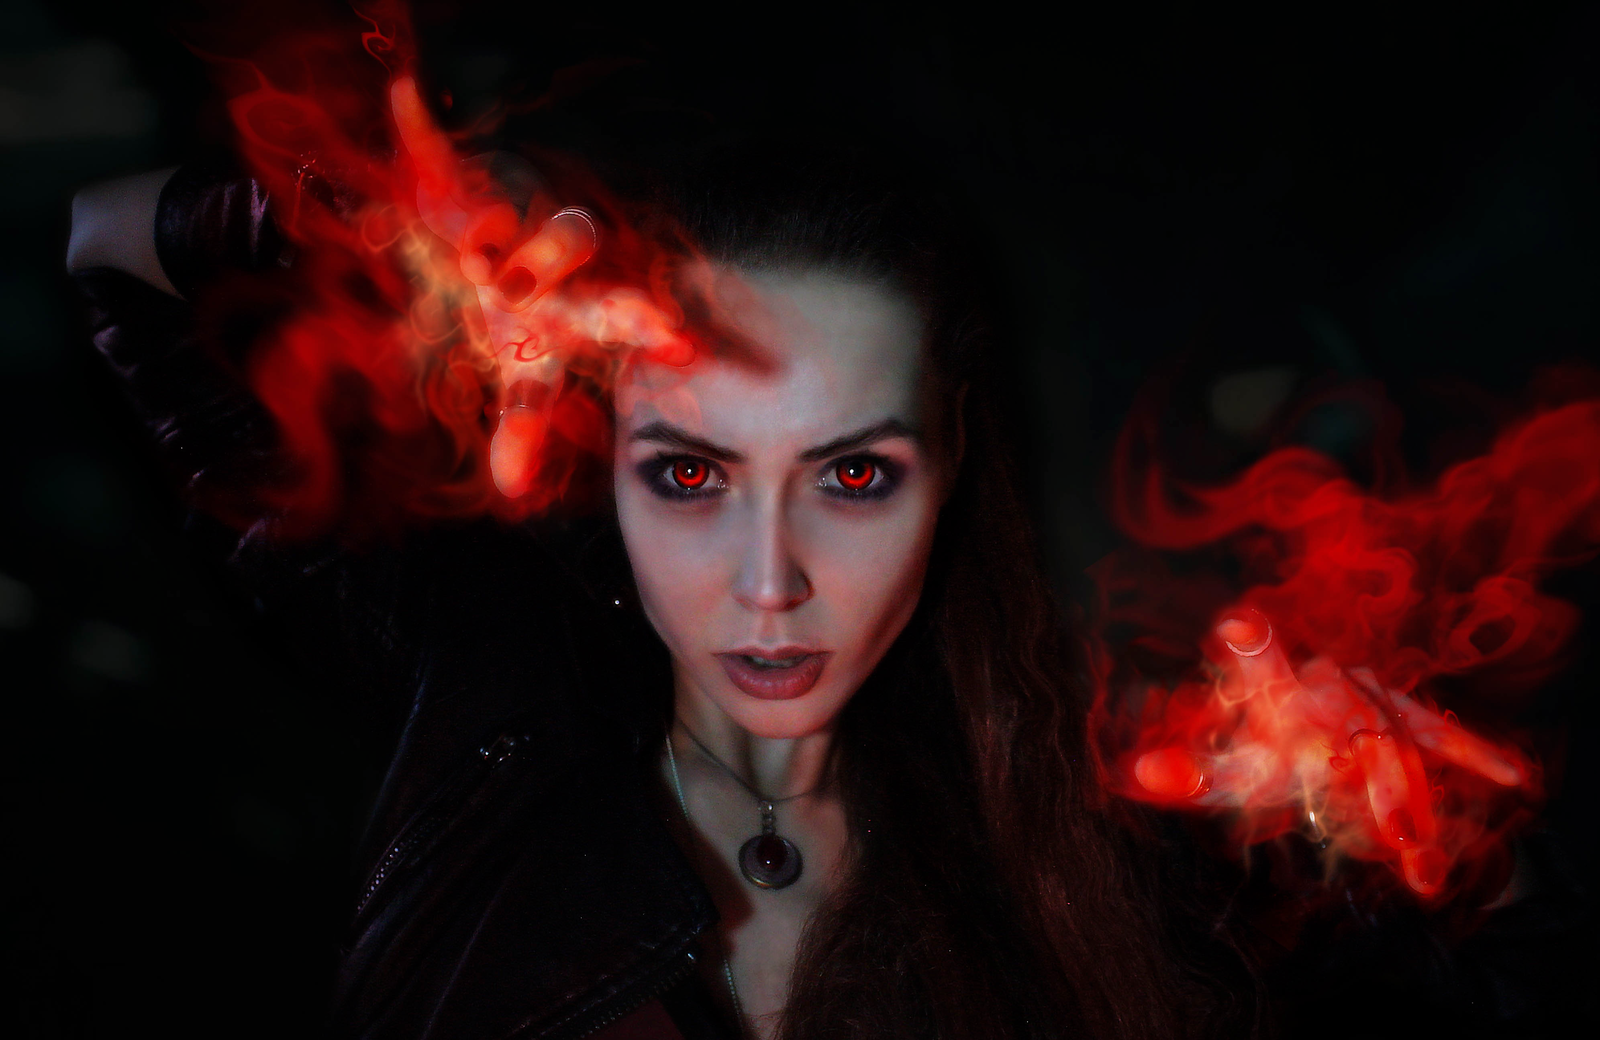 Scarlet Witch ( Avengers 2 ) cosplay - Scarlet Witch, Avengers: Age of Ultron